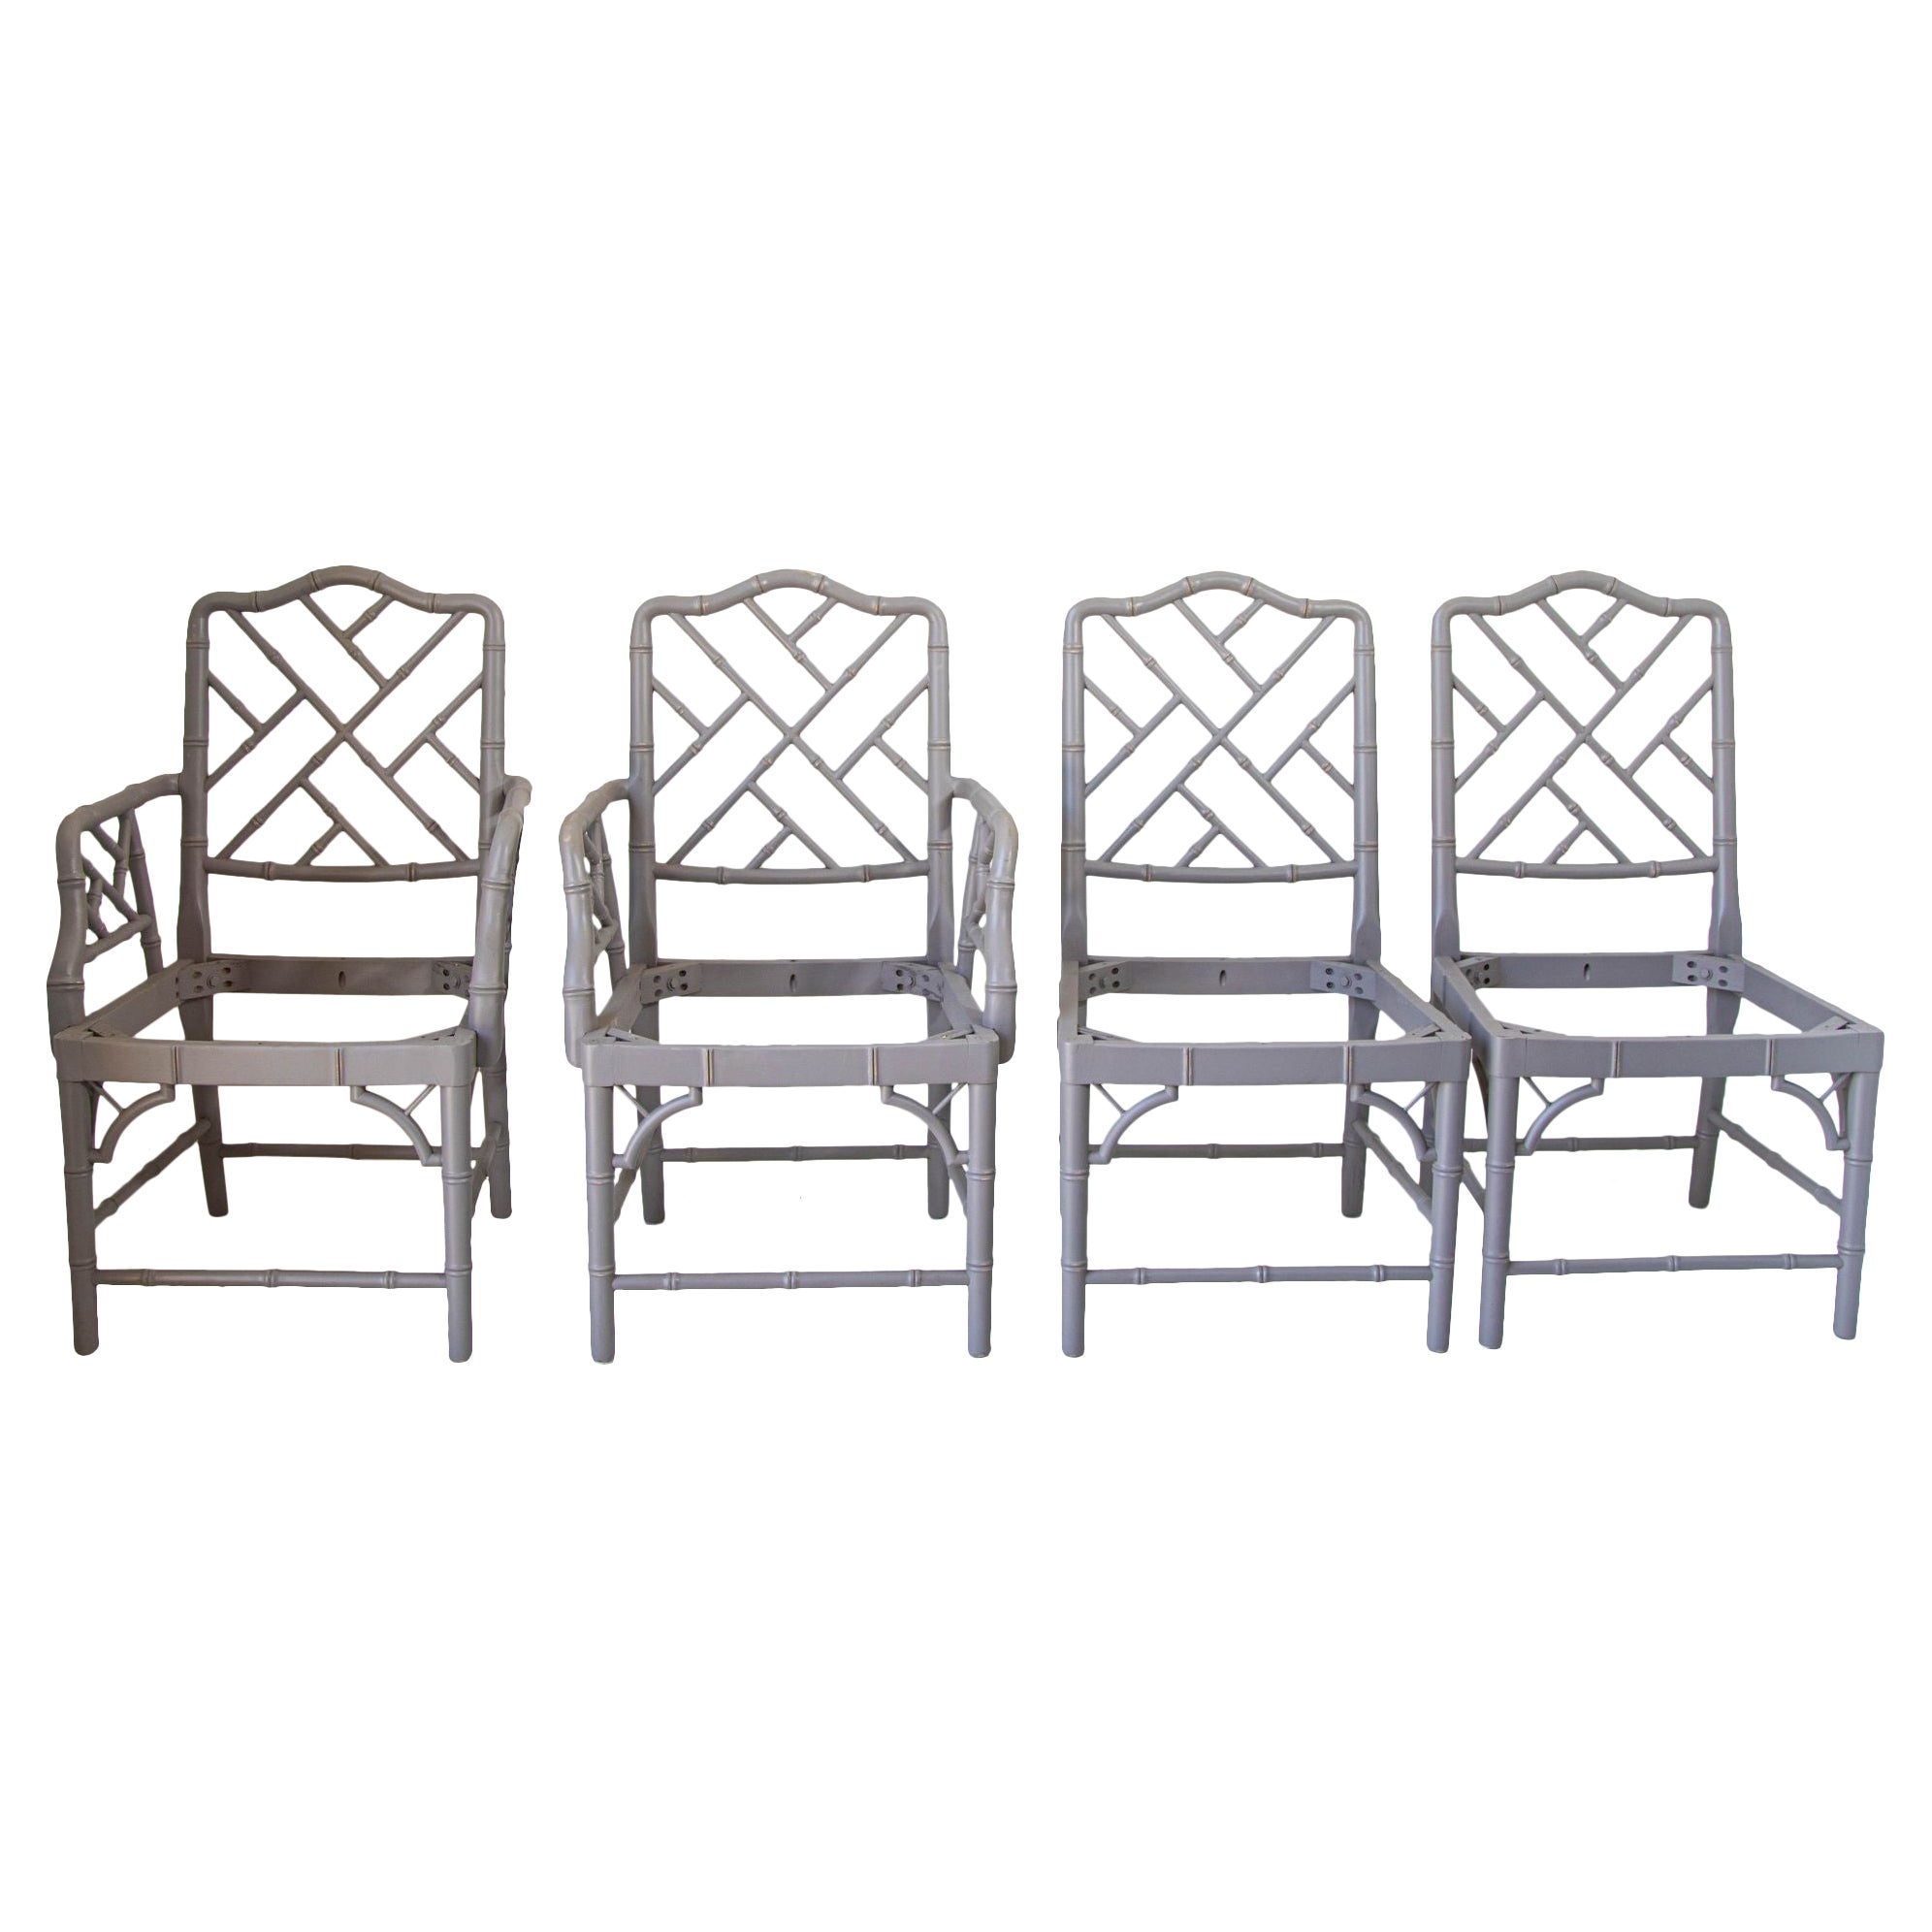 Chinese Chippendale Faux Bamboo Chairs Jonathan Adler Style Set of Four